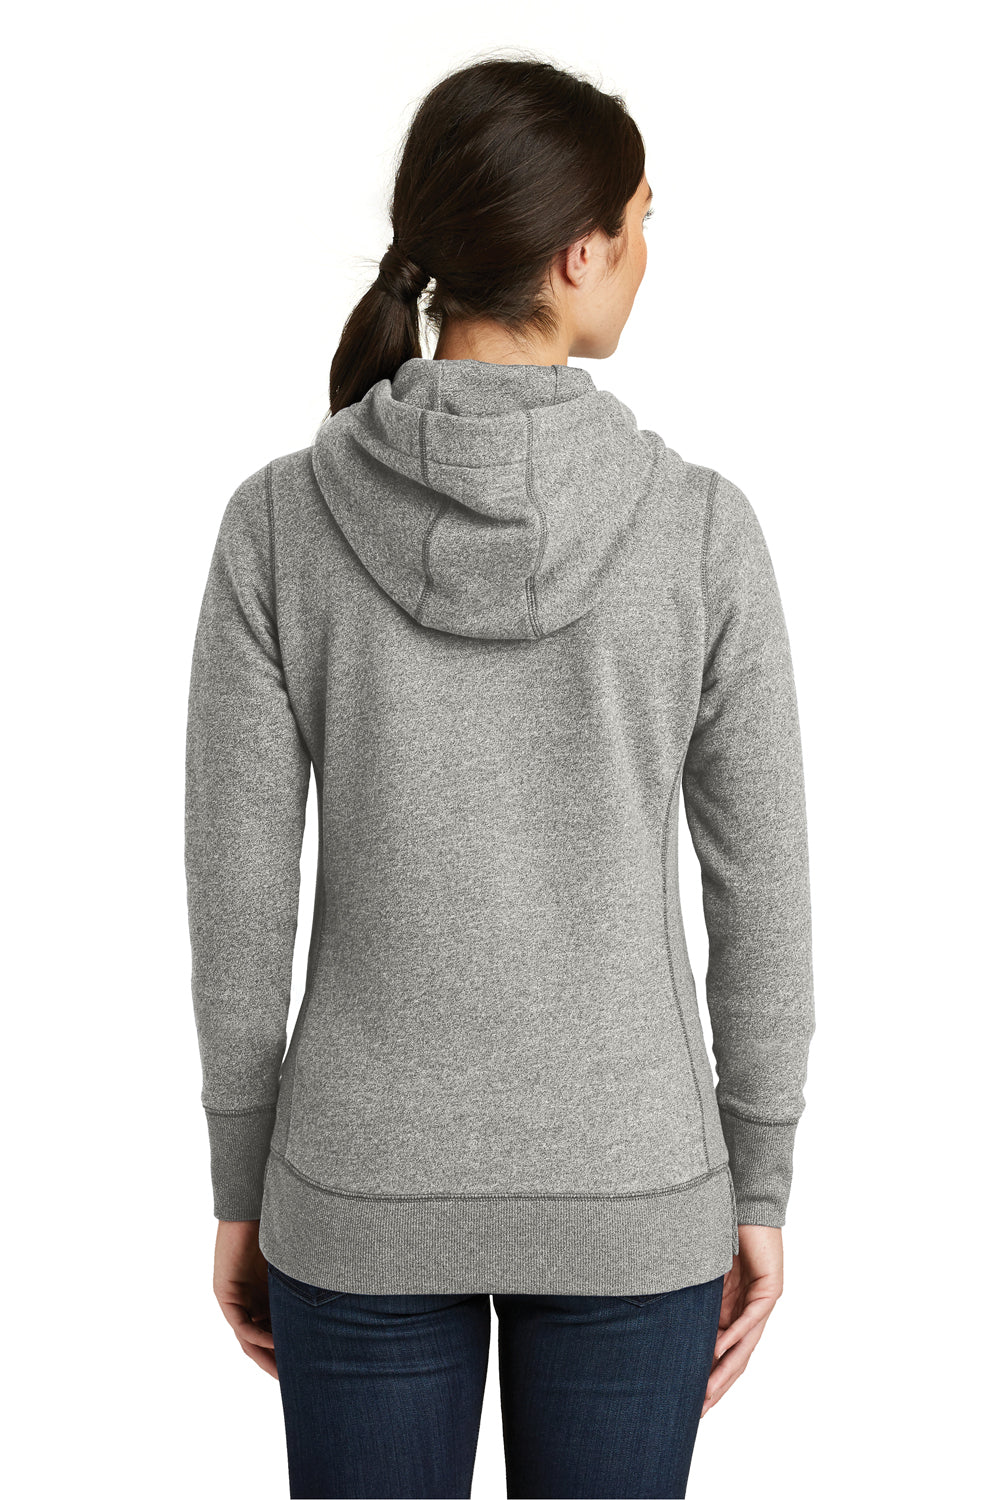 Download New Era Womens Sueded French Terry Full Zip Hooded ...